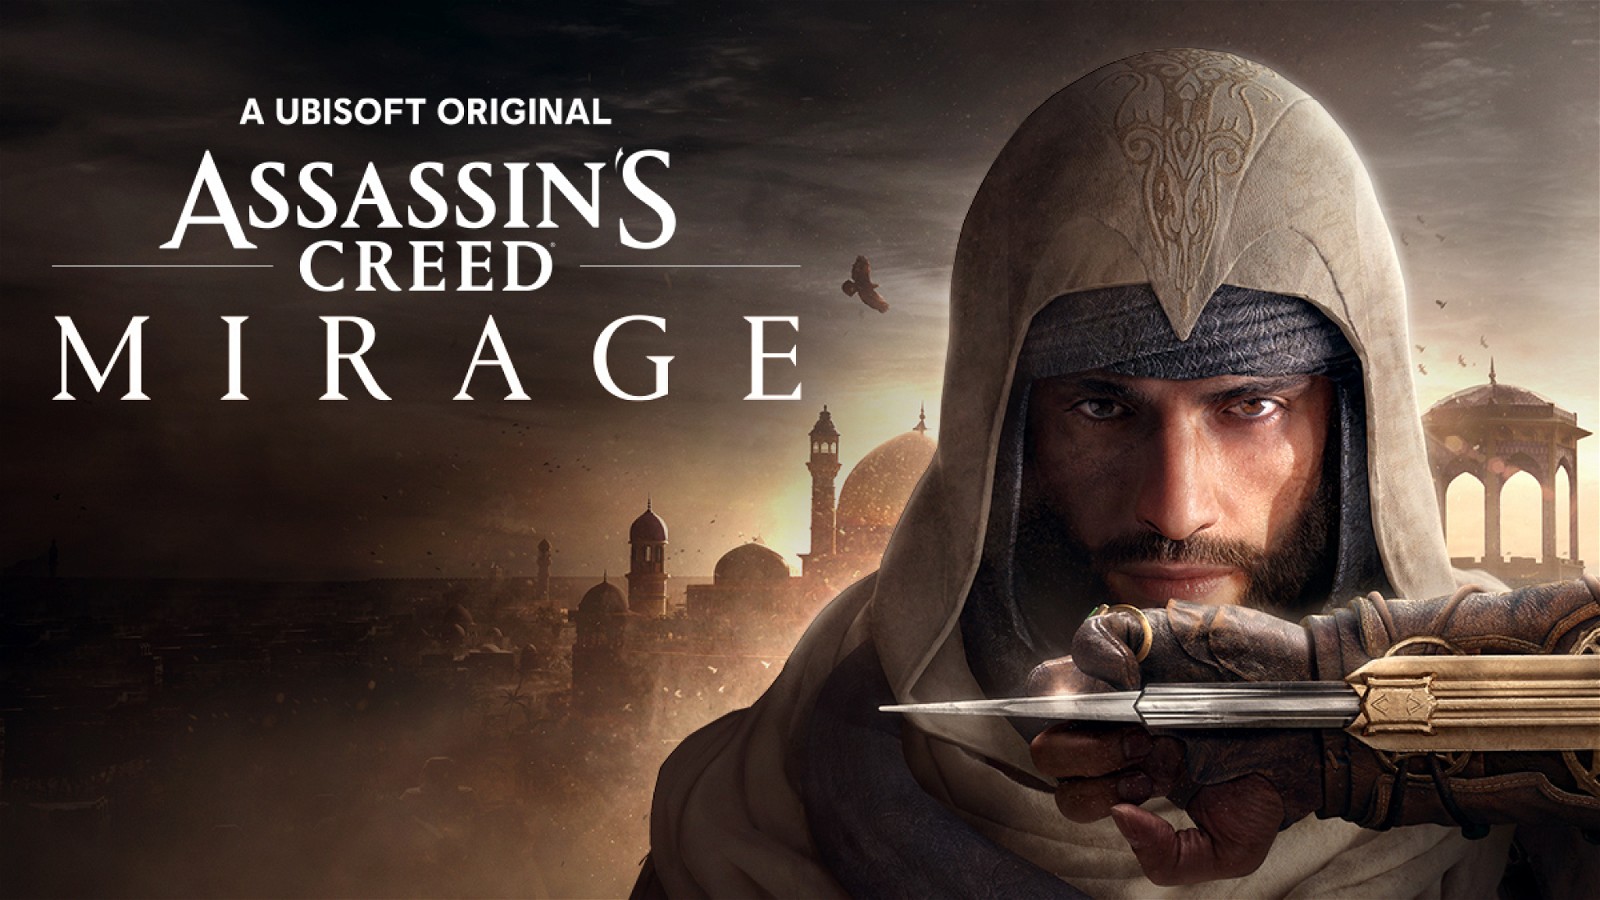 The Assassin's Creed Mirage Story length has been revealed